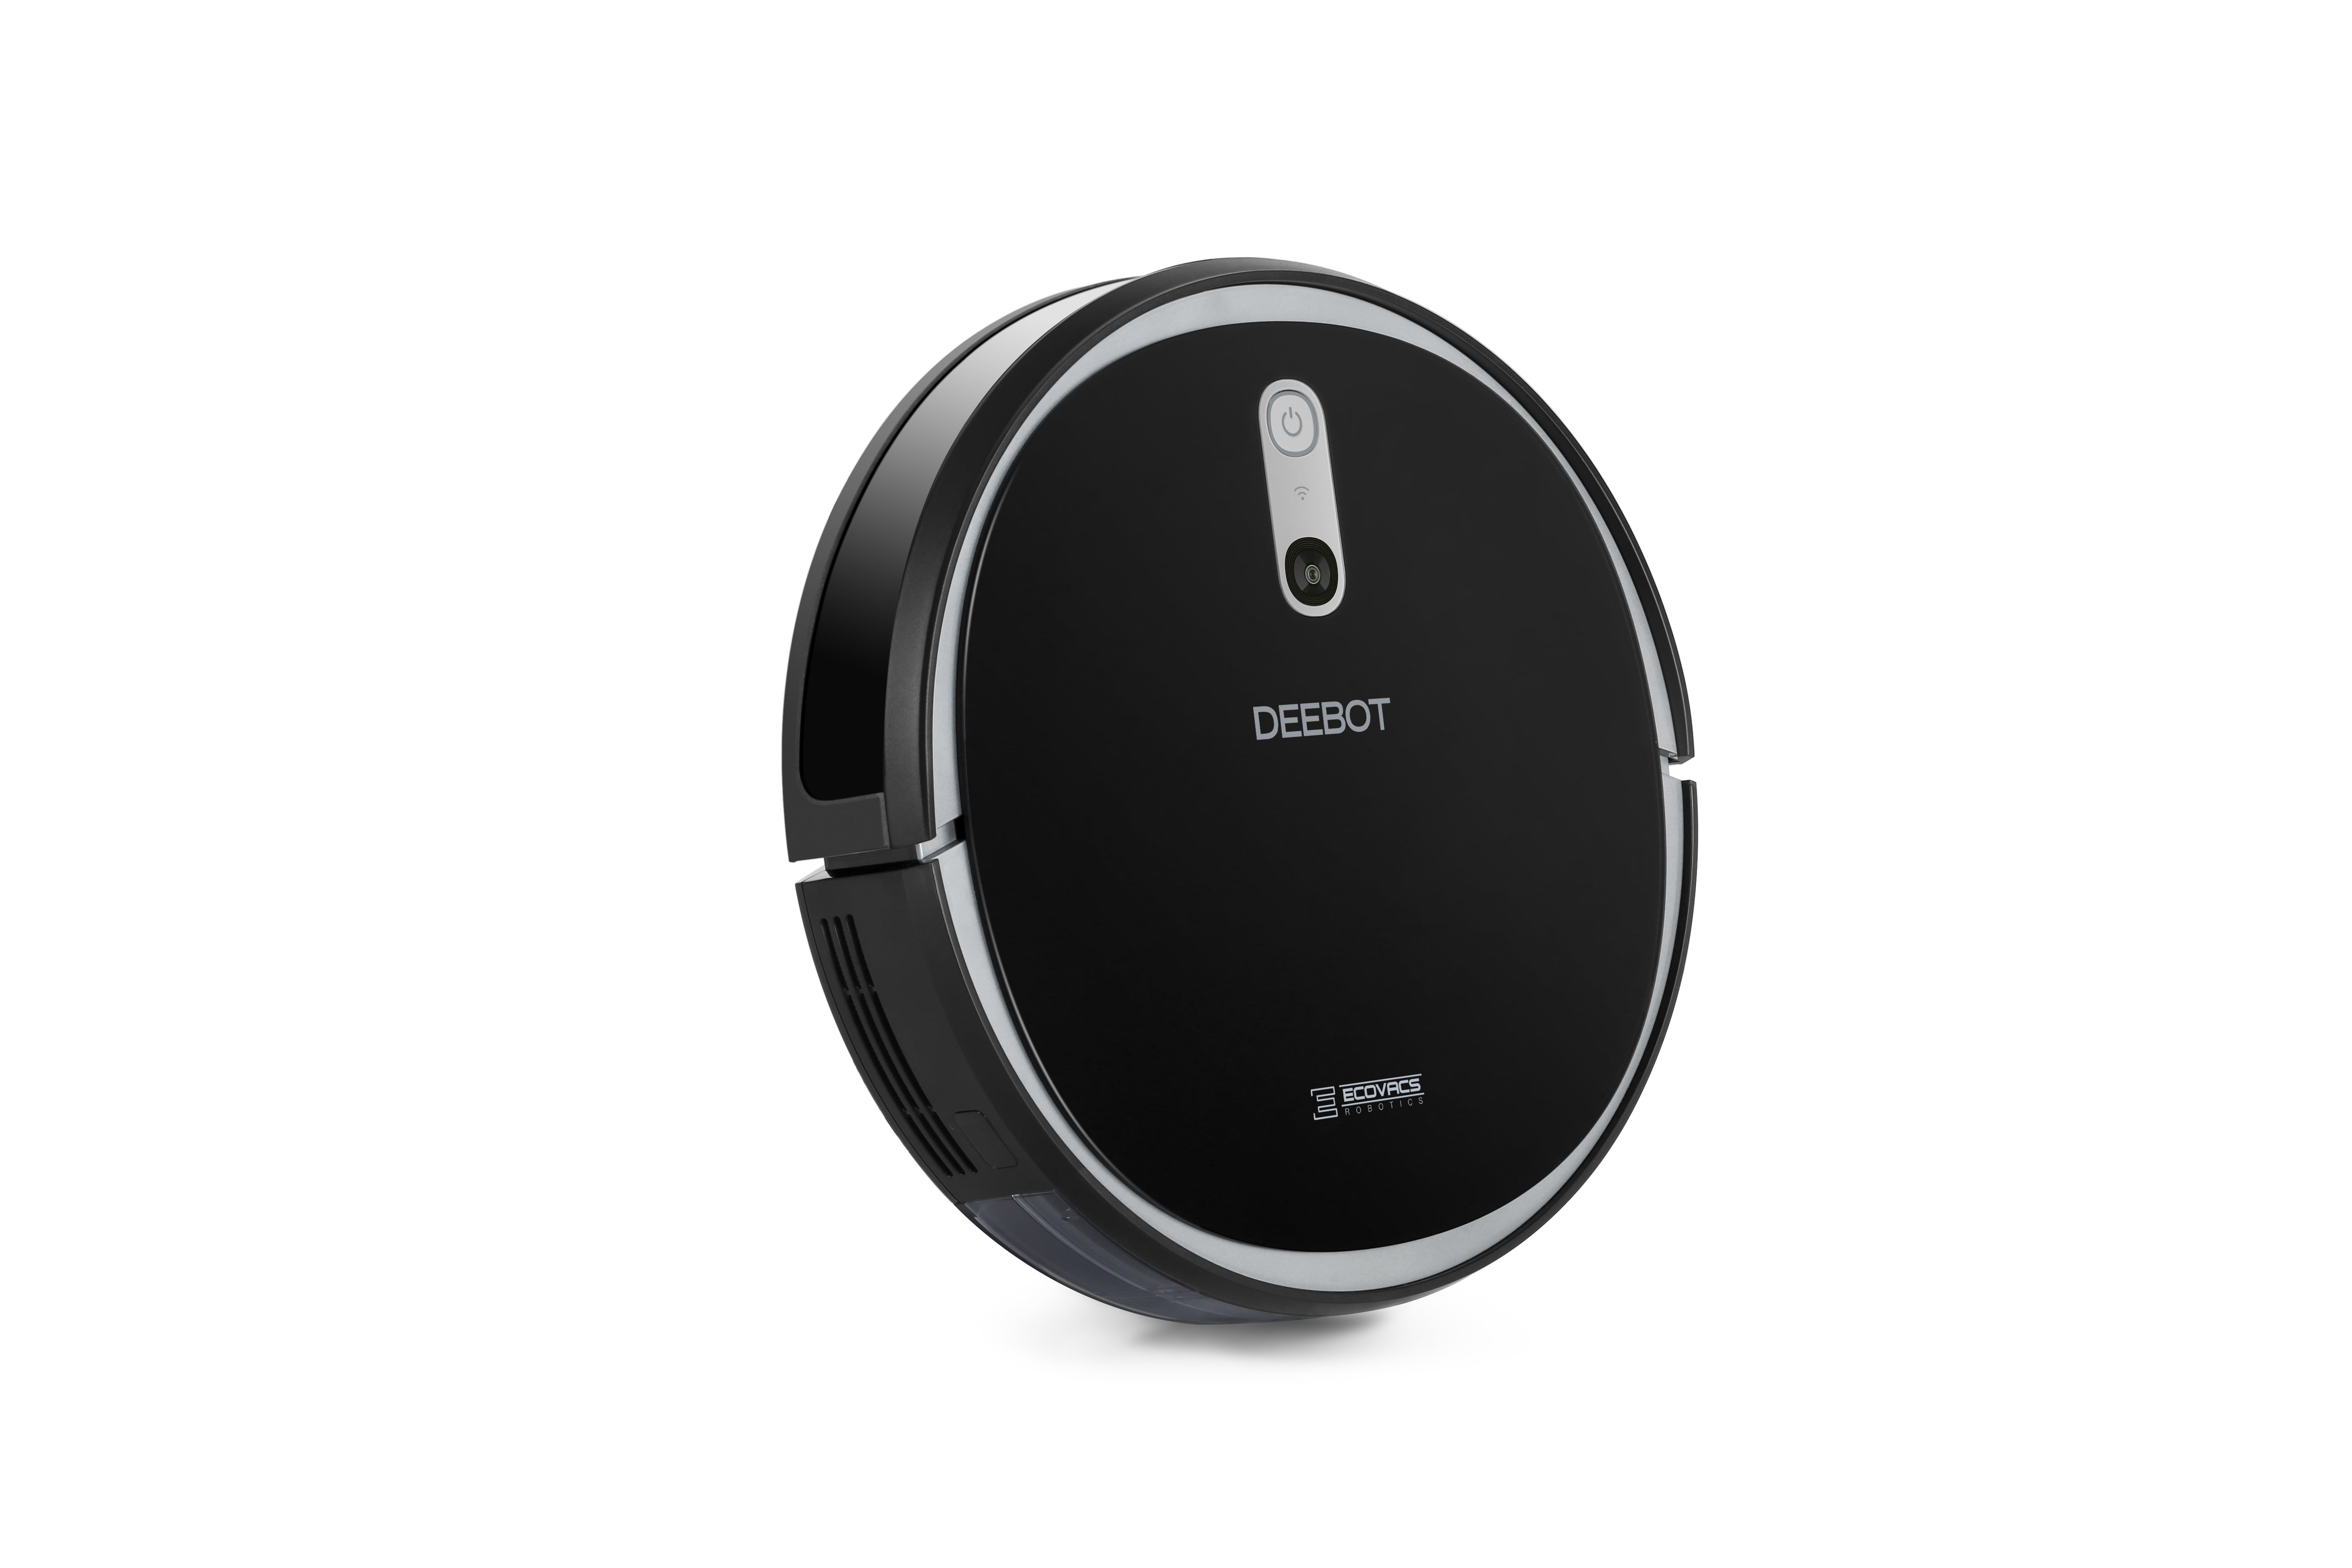 ECOVACS DEEBOT 711 Robot Vacuum Cleaner with App, 110 Minute Battery Life